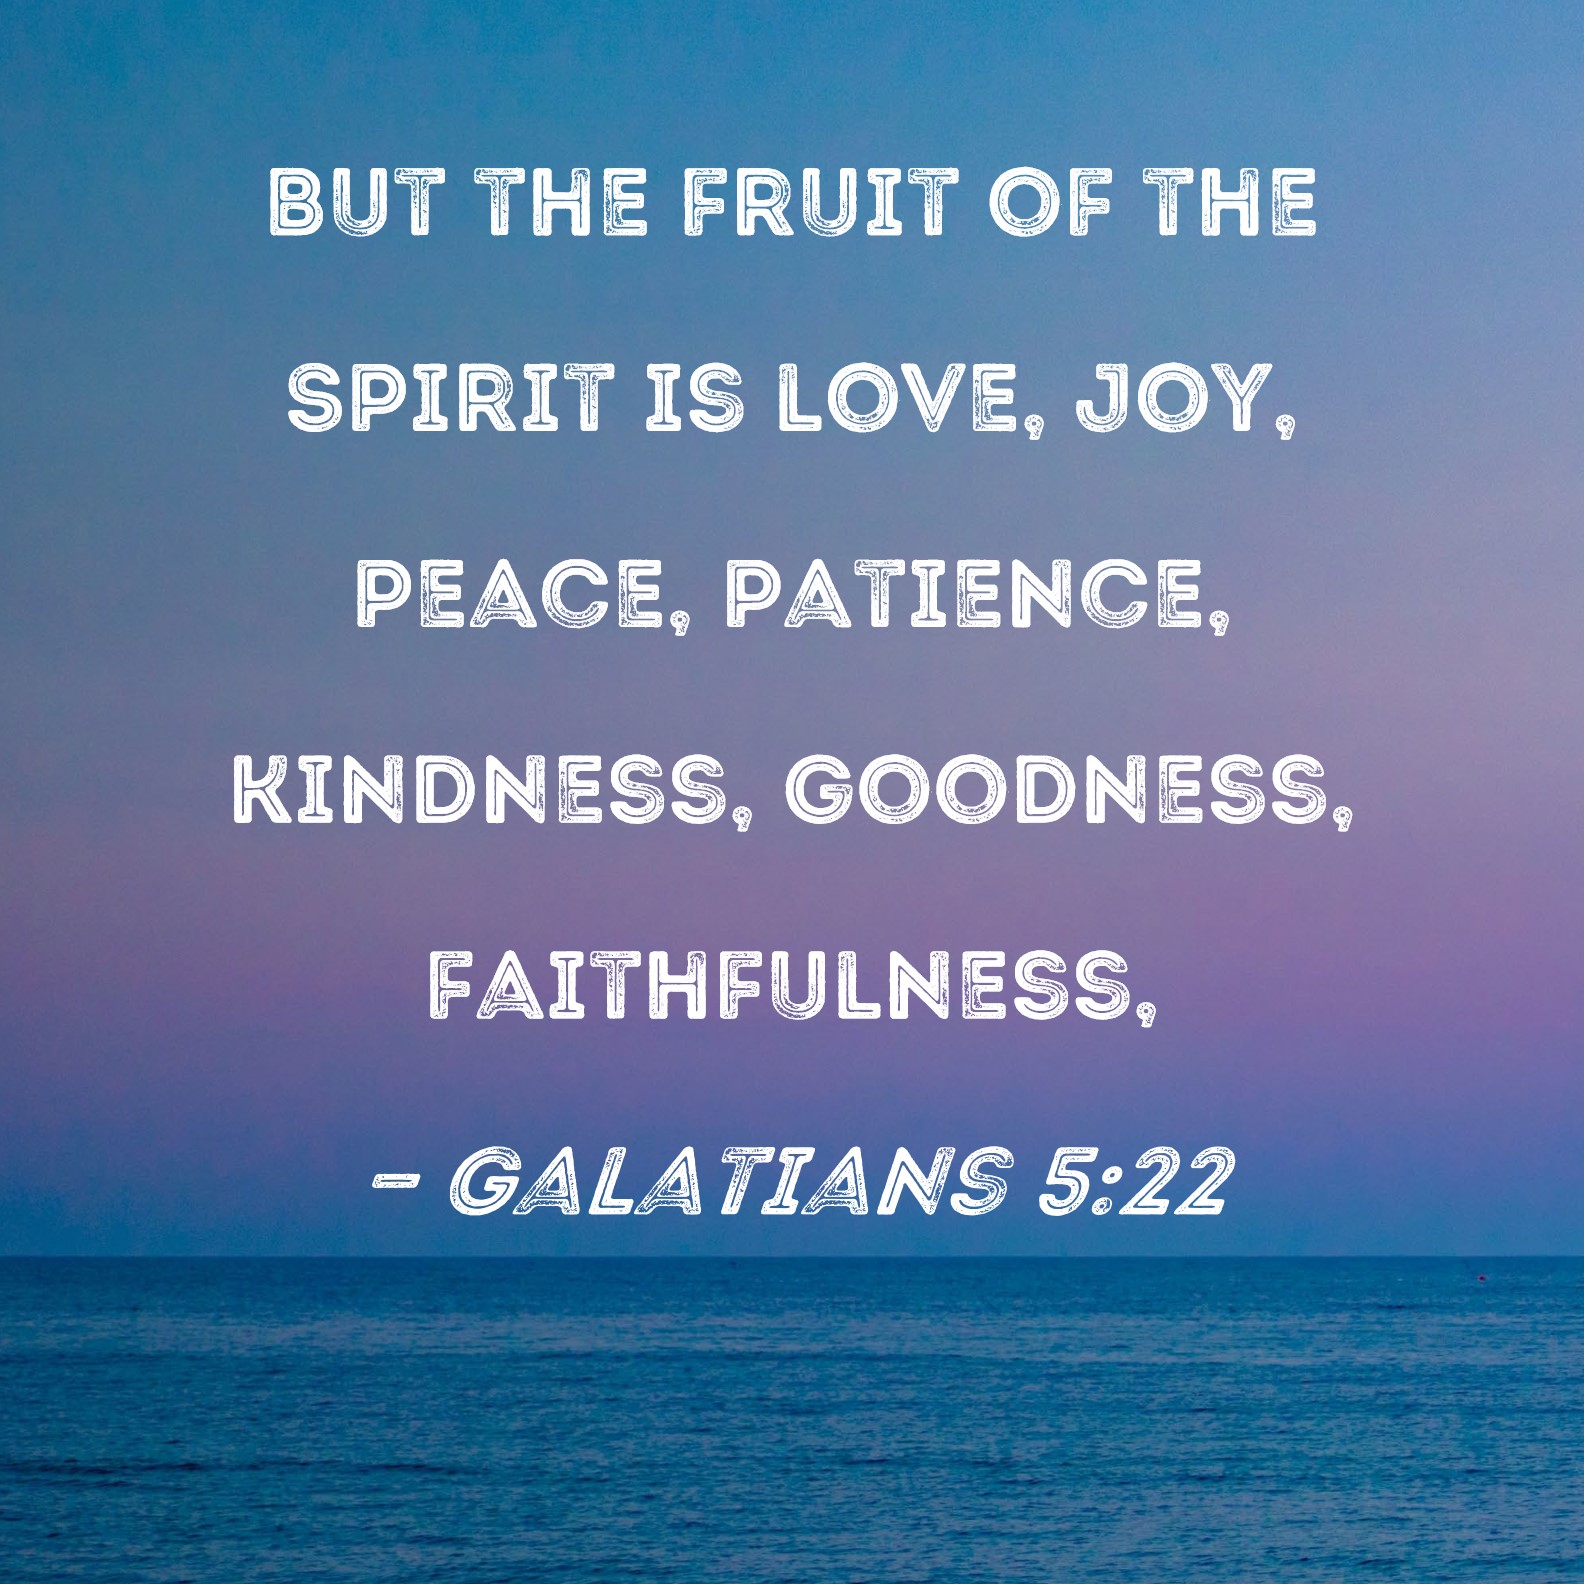 galatians-5-22-but-the-fruit-of-the-spirit-is-love-joy-peace